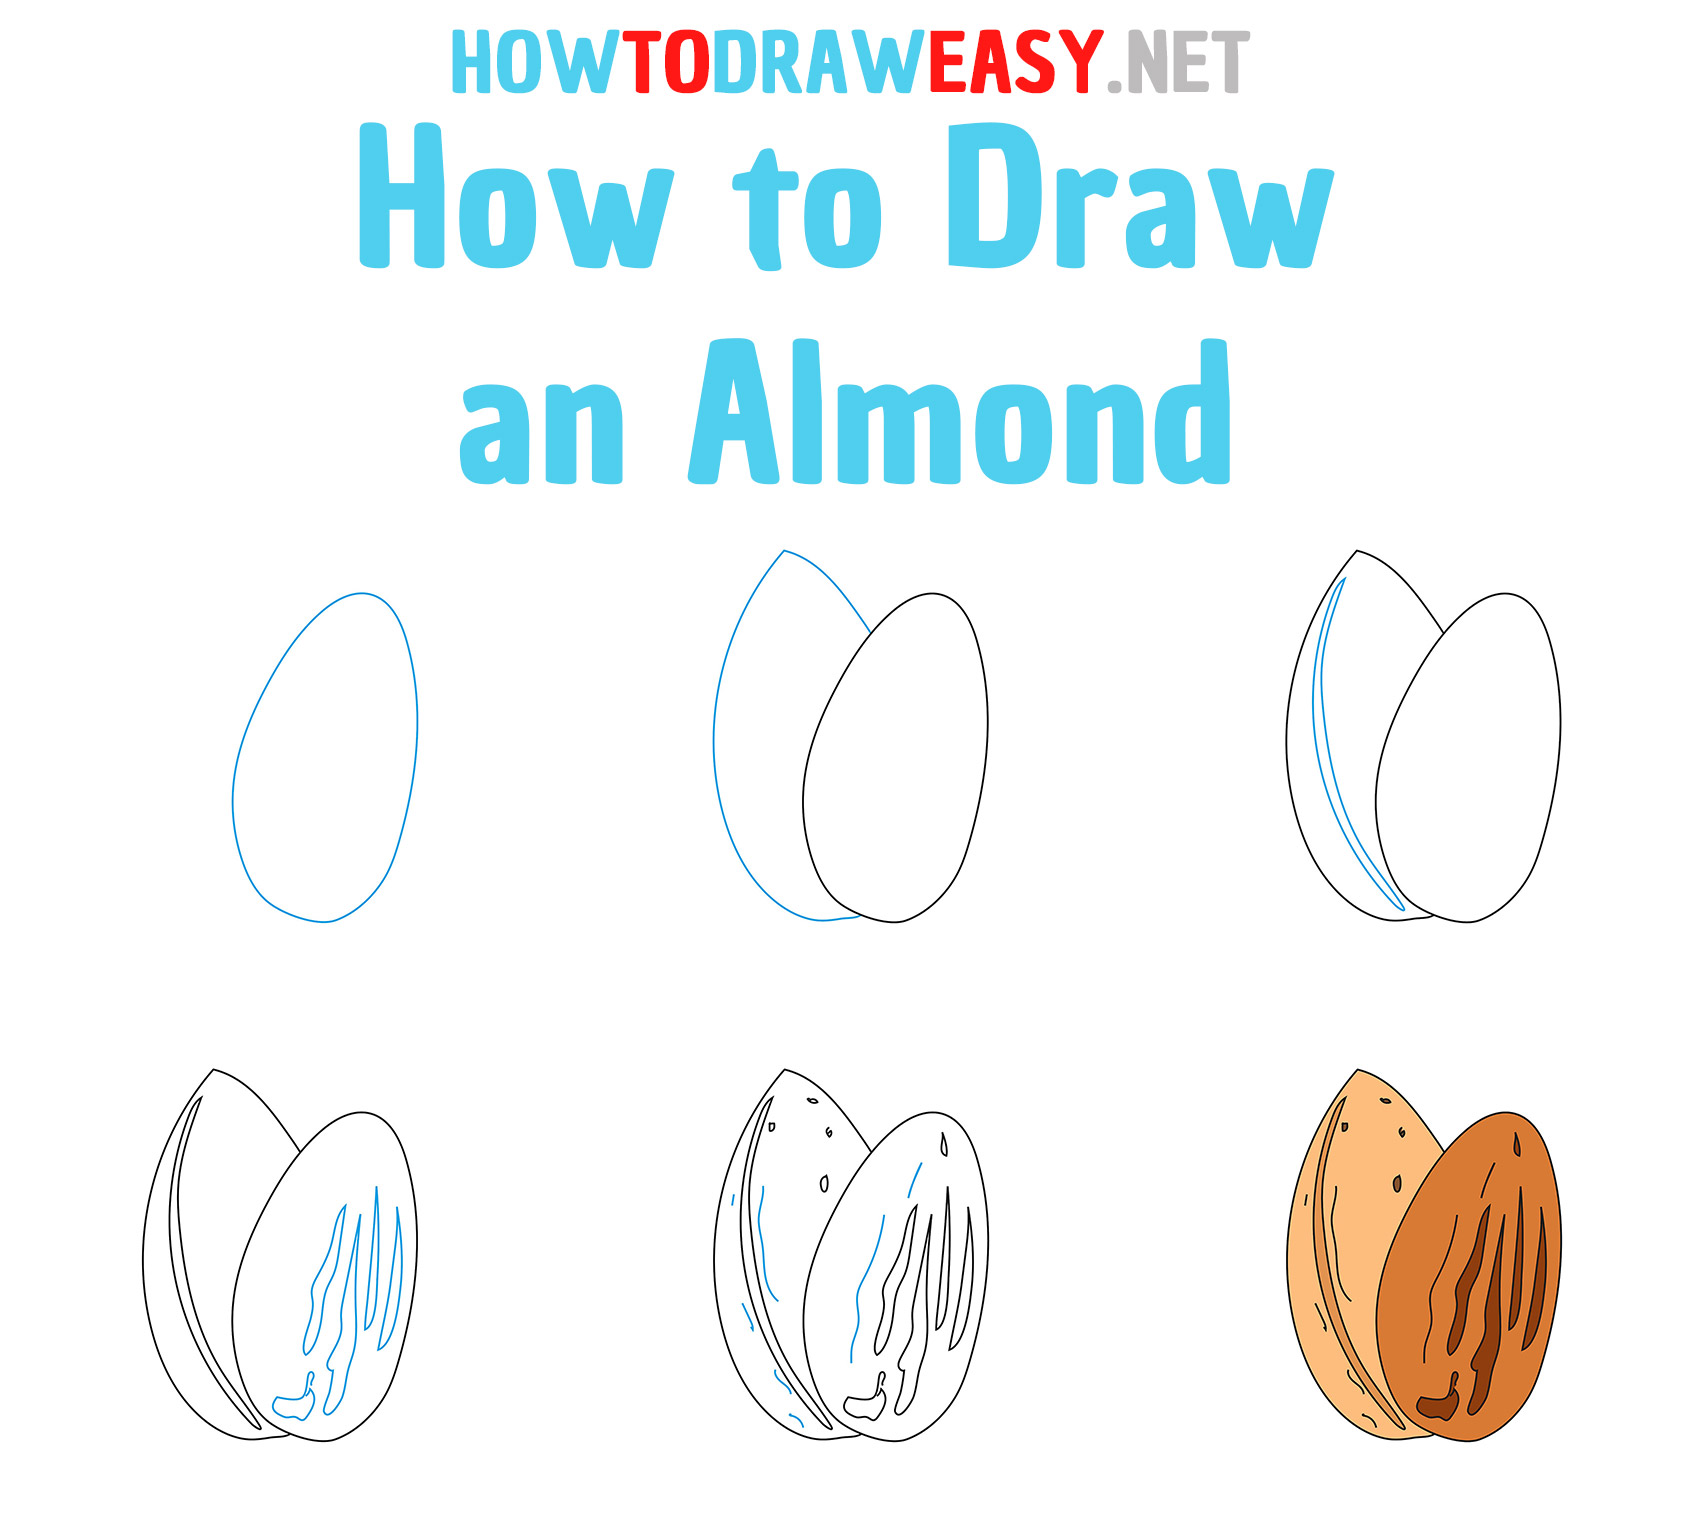 How to Draw an Almond Step by Step